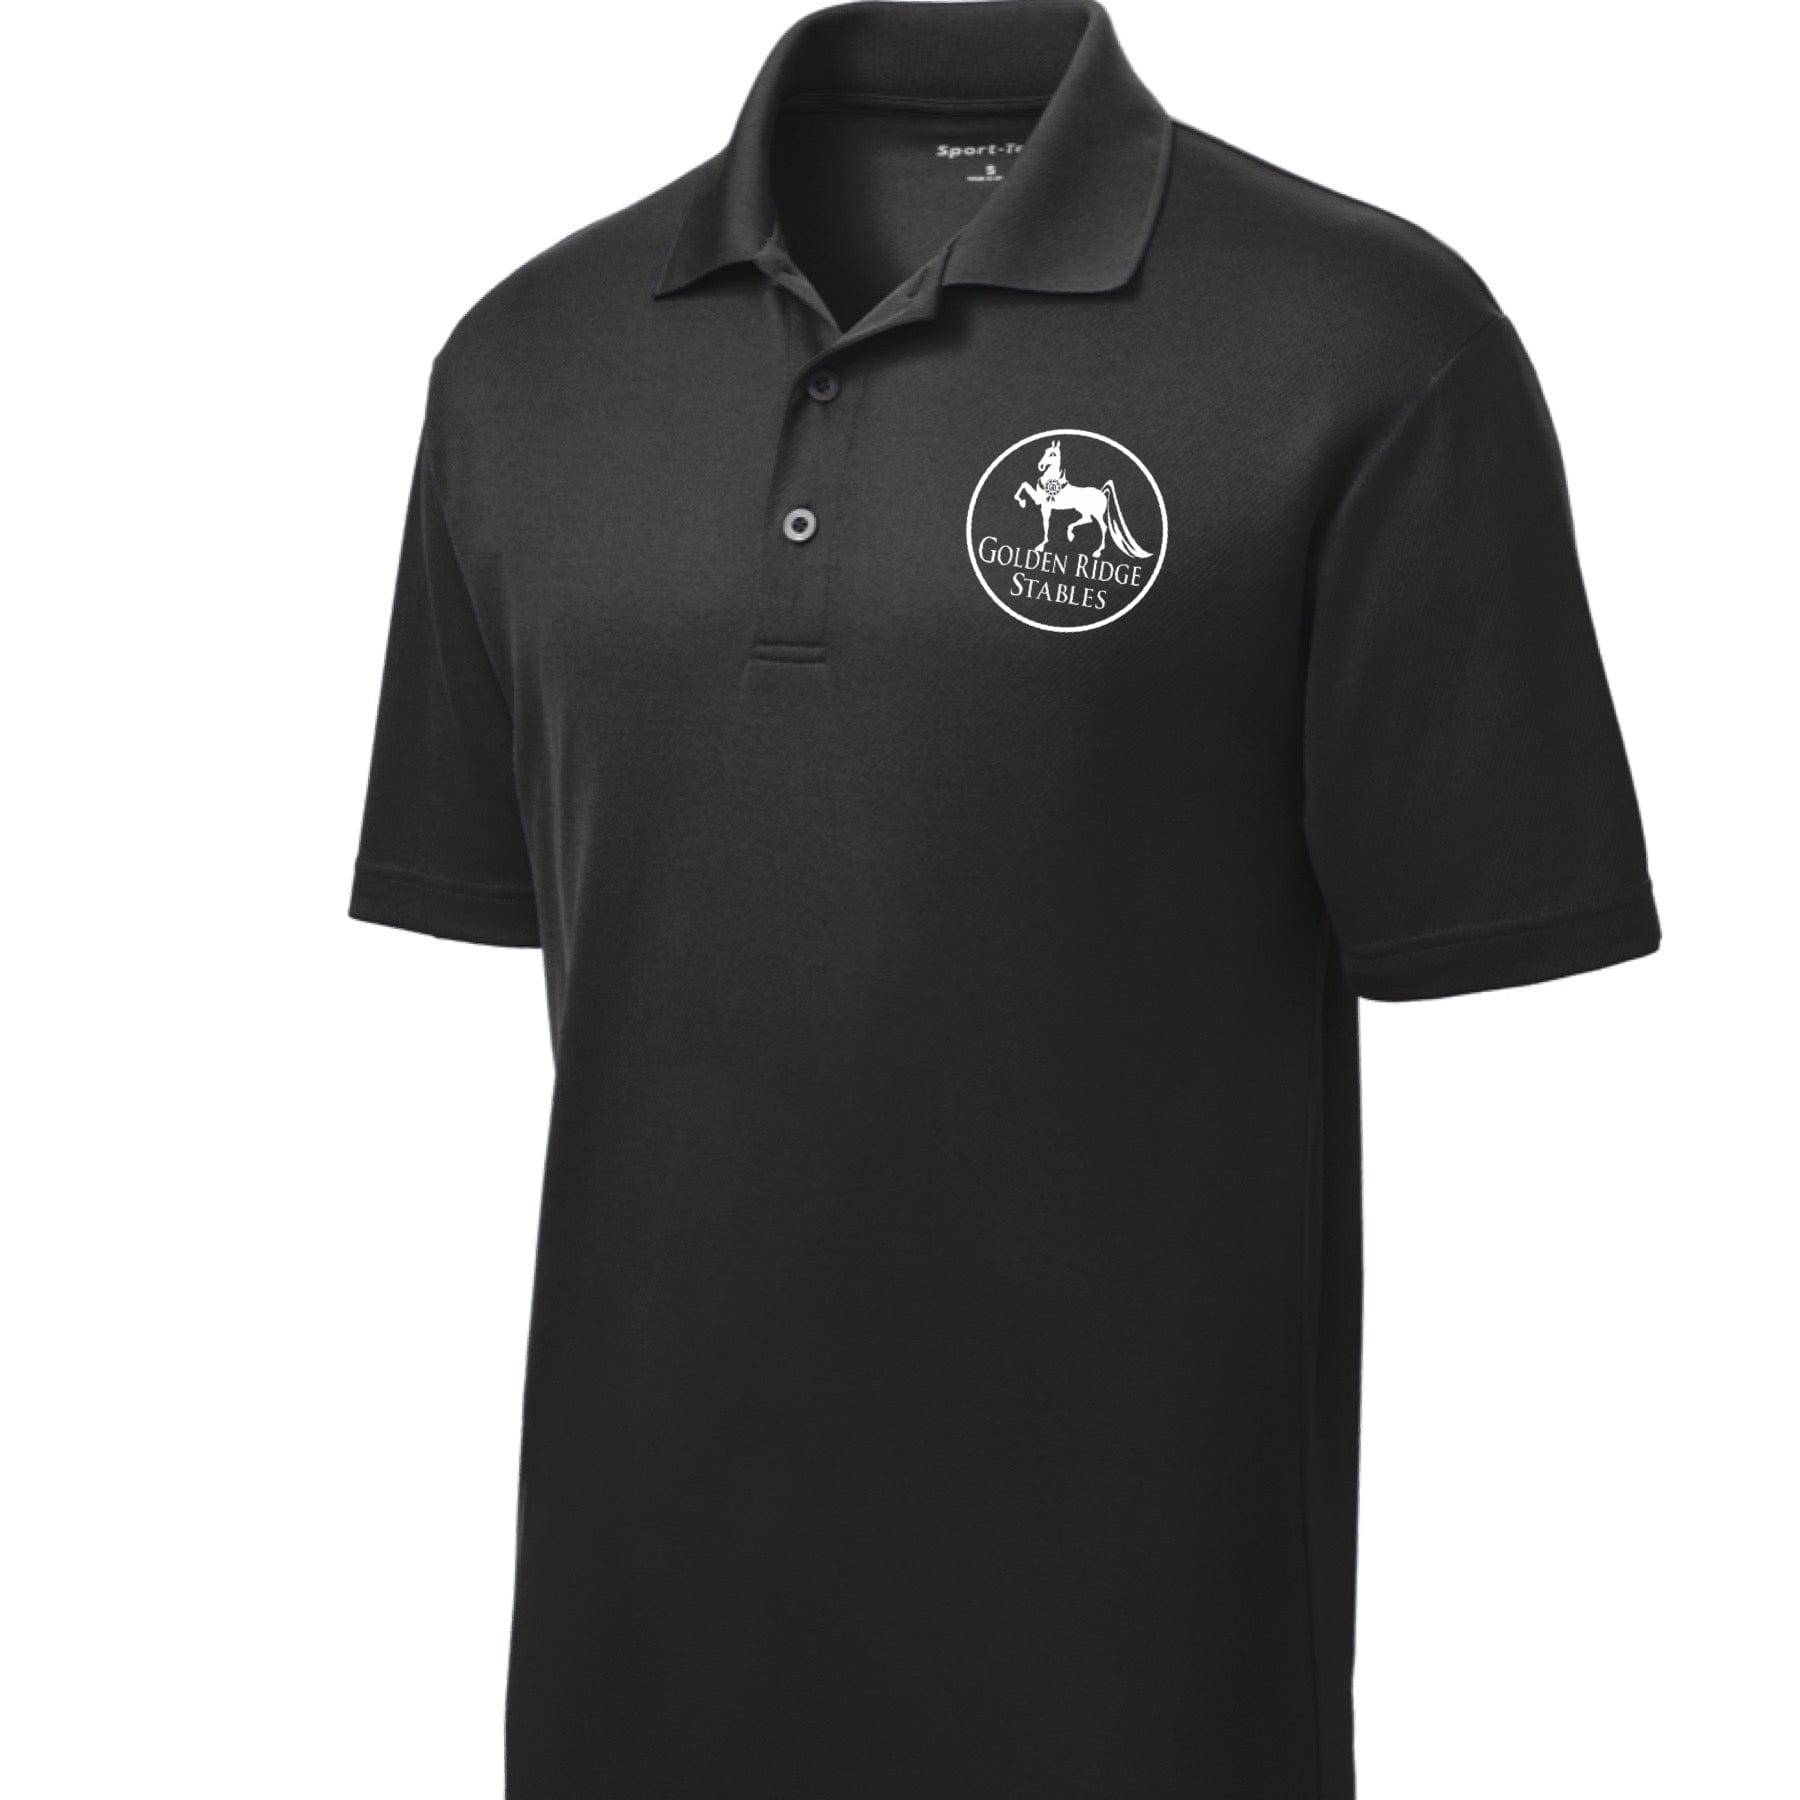 Equestrian Team Apparel Golden Ridge Stables Polo Shirt equestrian team apparel online tack store mobile tack store custom farm apparel custom show stable clothing equestrian lifestyle horse show clothing riding clothes horses equestrian tack store